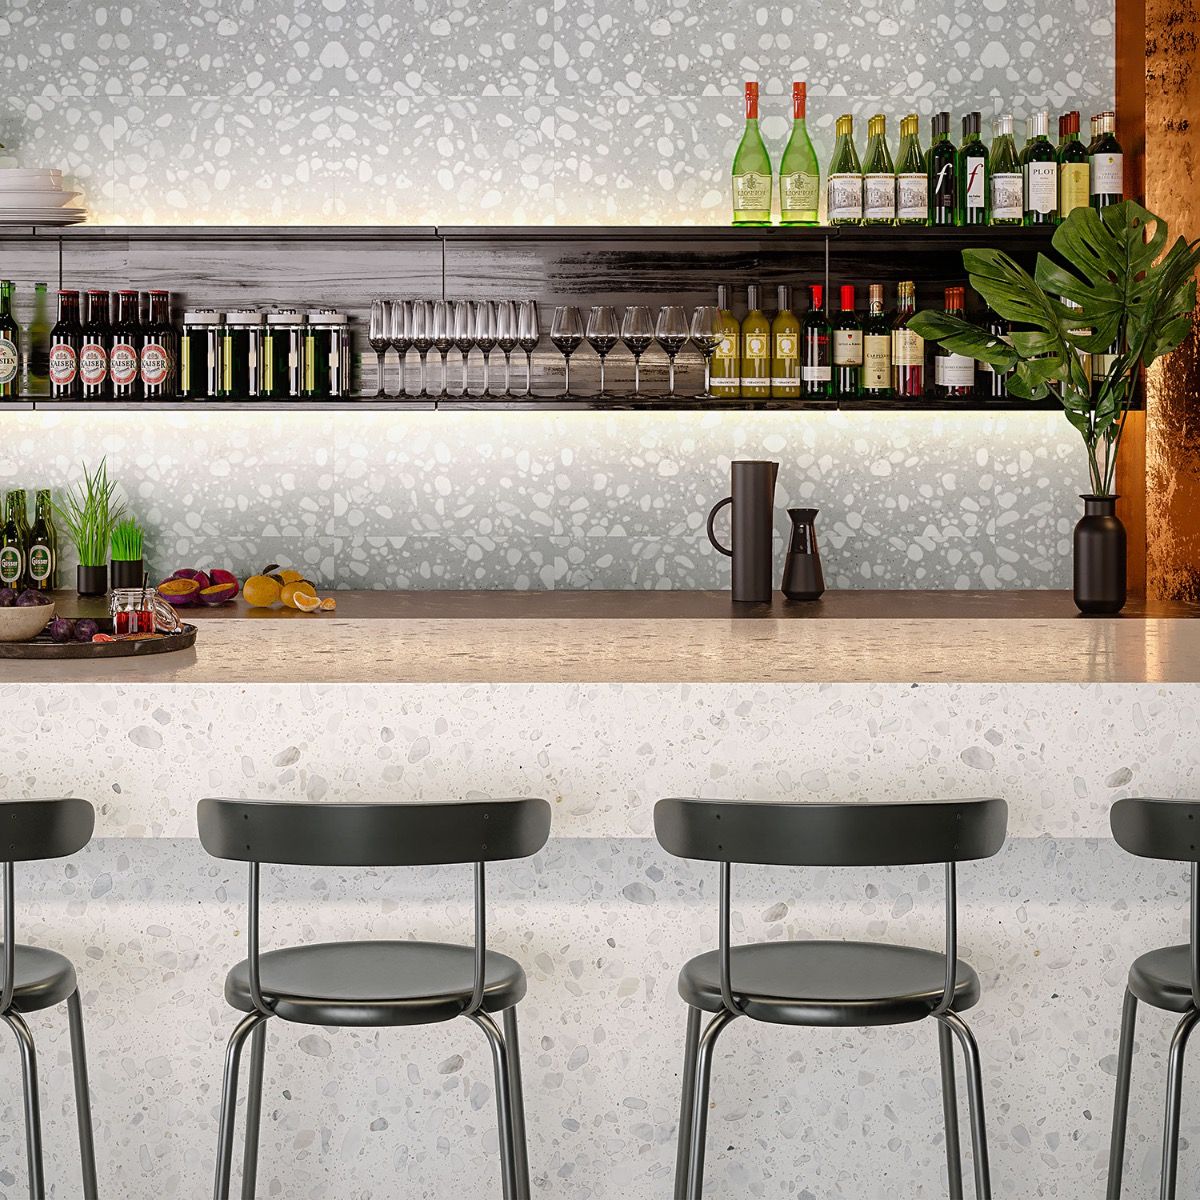 Terrazzo Italy Sacra Bianco 24x24 Honed Marble Tile in a bar on the wall